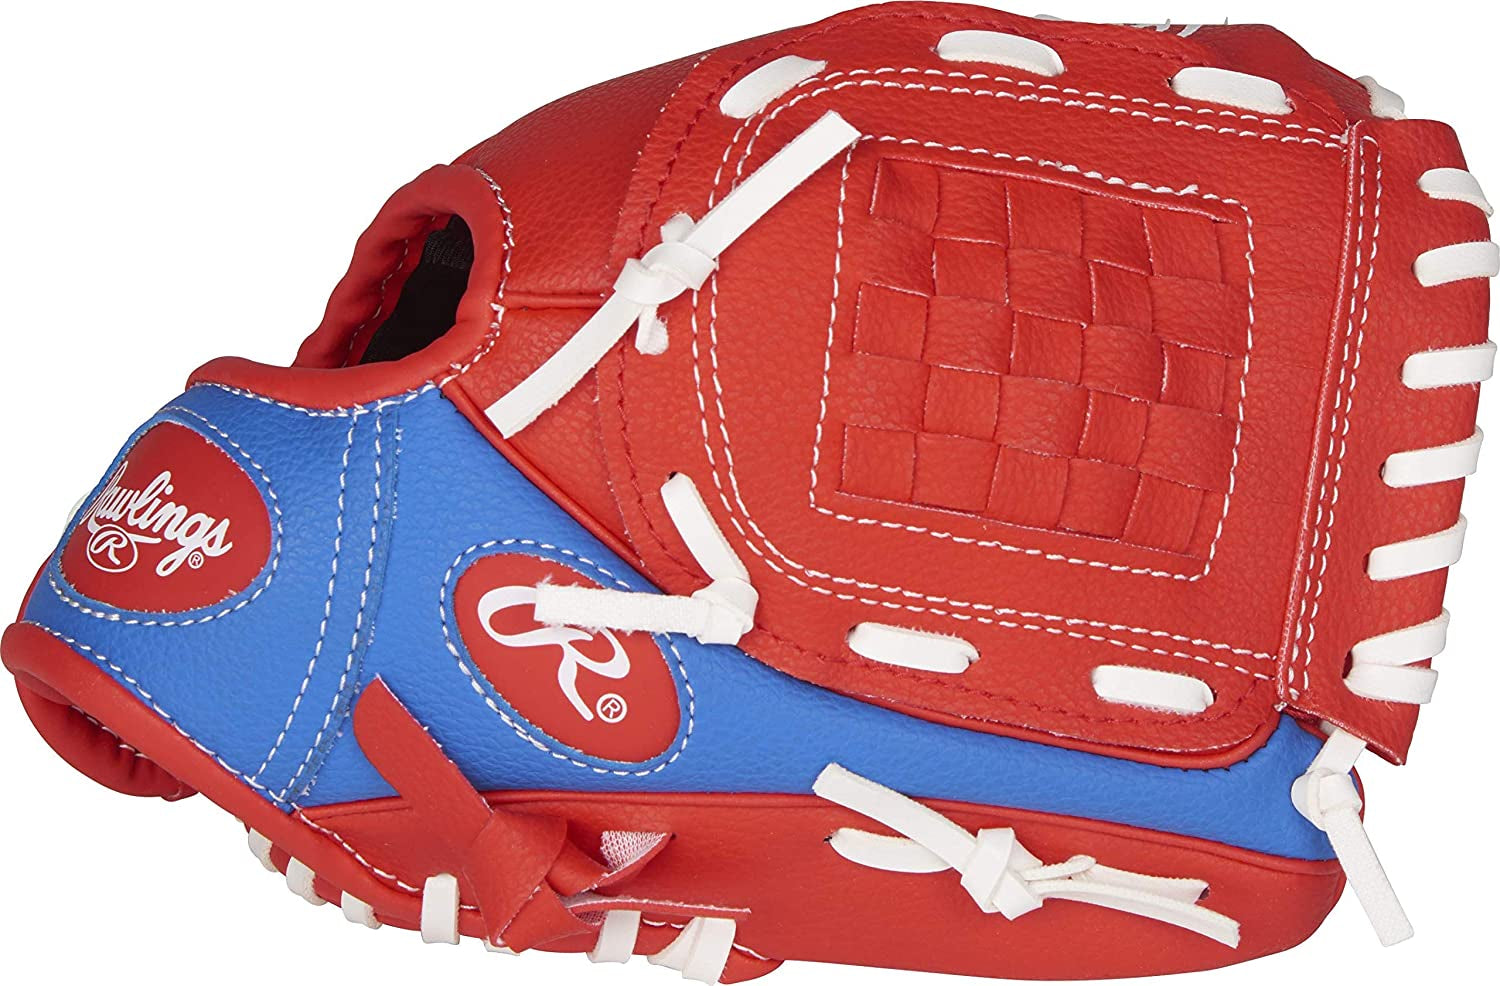 "Youth Baseball Glove from the Players Series - Ideal for Young Athletes, Offering a Variety of Styles and Sizes!"